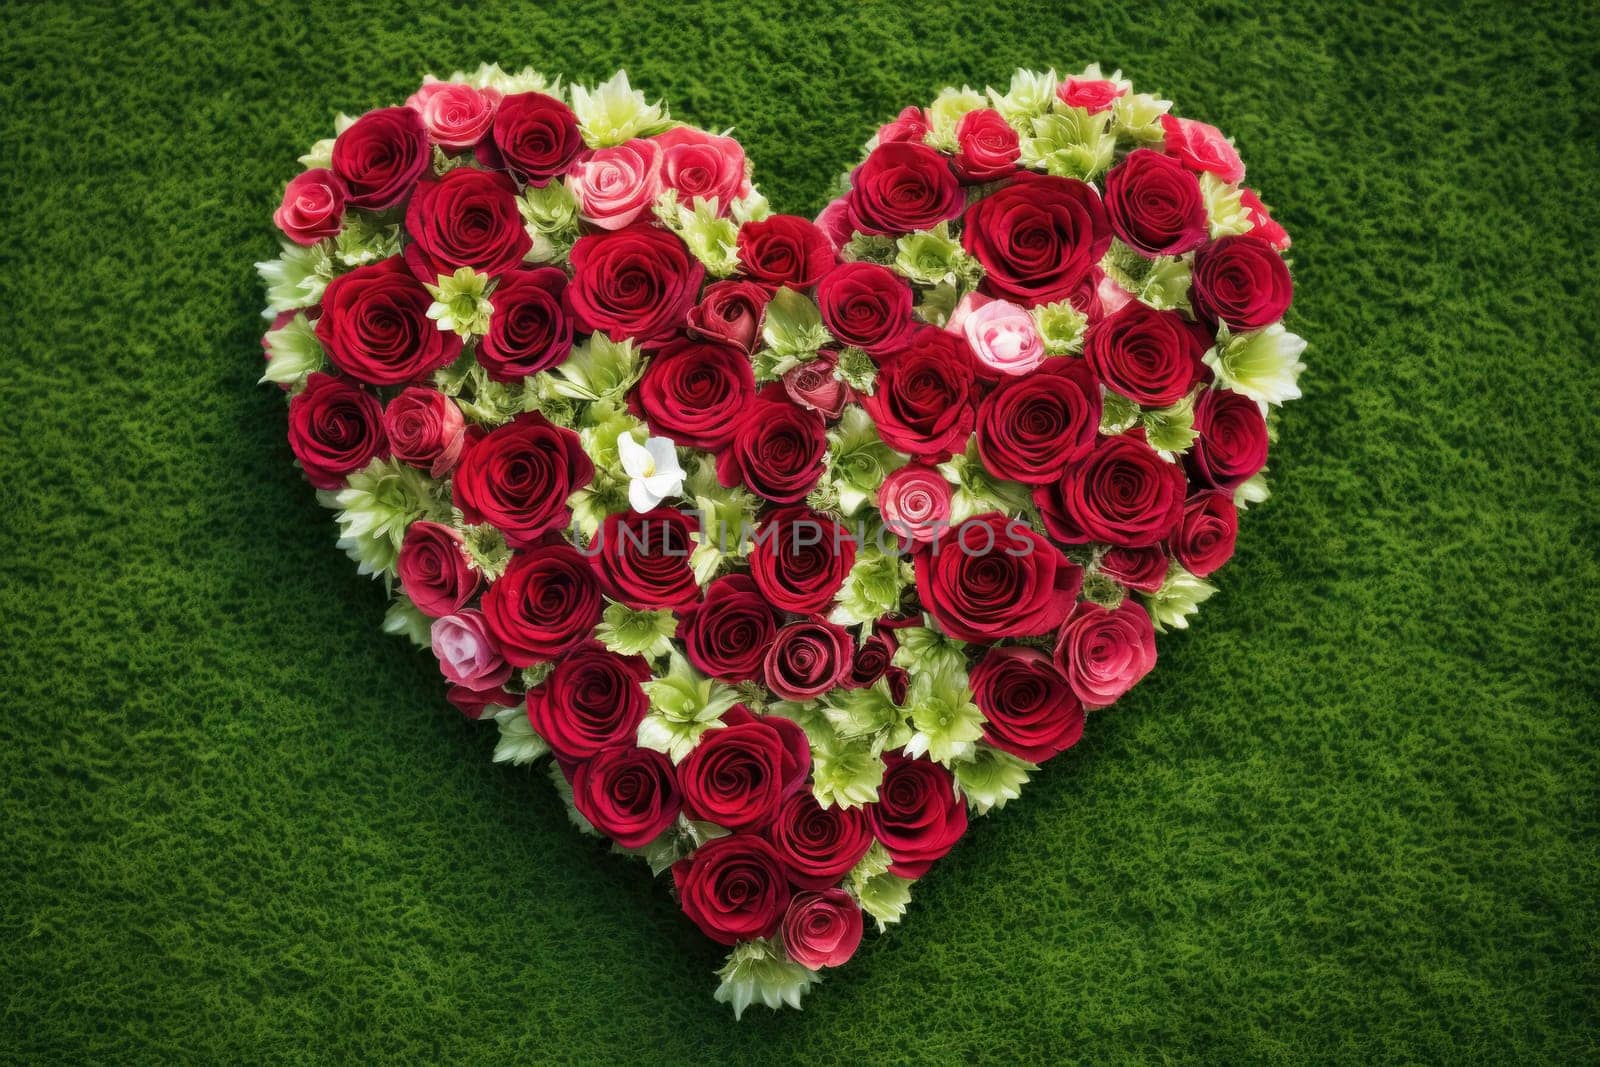 Heart-shaped arrangement of red roses and greenery on grass, evoking romantic and festive sentiments.